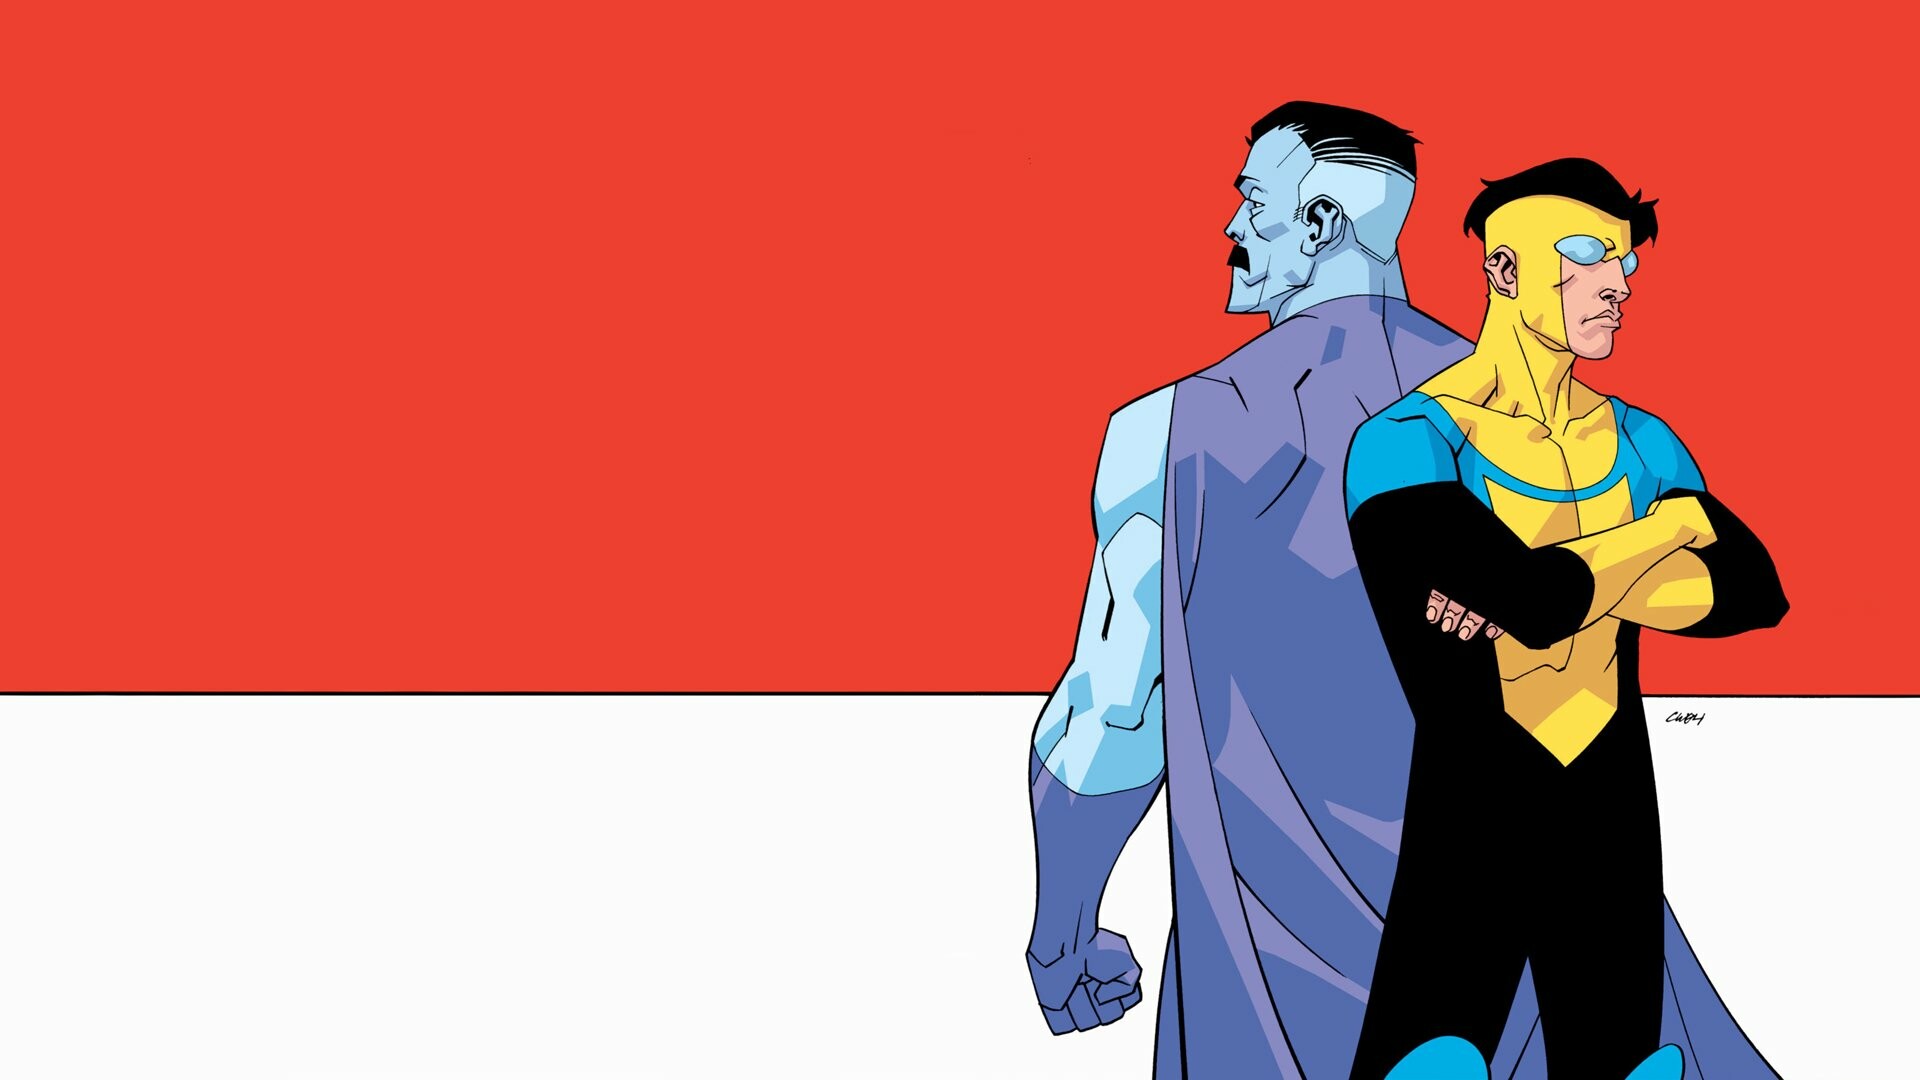 Invincible, Animated series, Superhero storyline, Action-packed, 1920x1080 Full HD Desktop